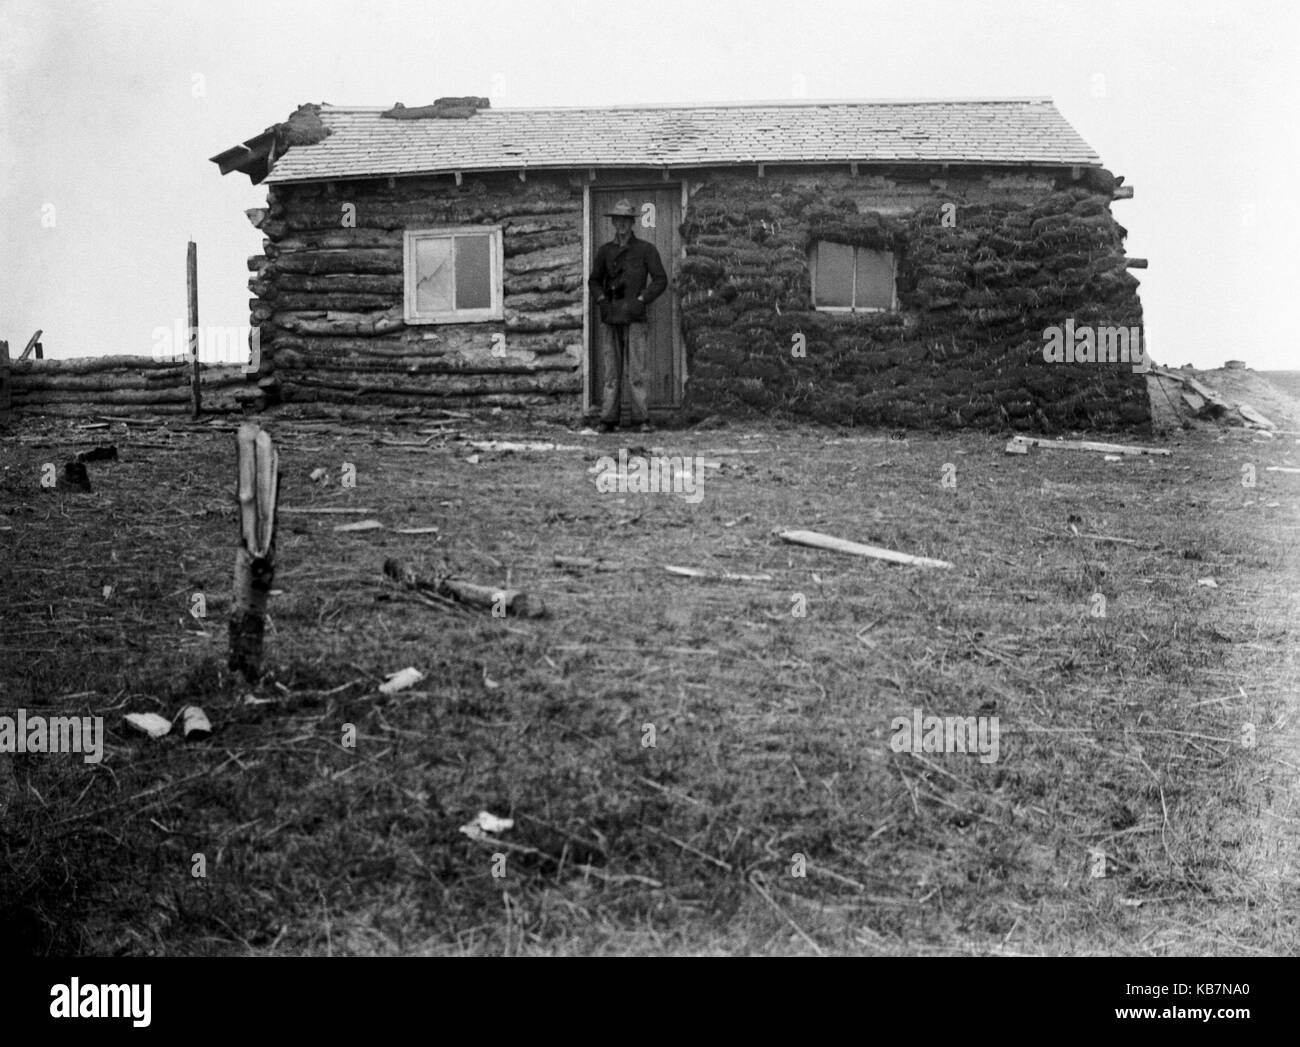 AJAXNETPHOTO. 1903. CANADA, EXACT LOCATION UNKNOWN. - ANNOTATION ON GLASS PLATE 'HAL. SHACK'. MAN IN NORTH WEST MOUNTED POLICE UNIFORM POSING OUTSIDE LOG CABIN SHACK WITH PEAT COVERING HALF FACADE.  PHOTOGRAPHER:UNKNOWN © DIGITAL IMAGE COPYRIGHT AJAX VINTAGE PICTURE LIBRARY SOURCE: AJAX VINTAGE PICTURE LIBRARY COLLECTION REF:AVL 2373 Stock Photo